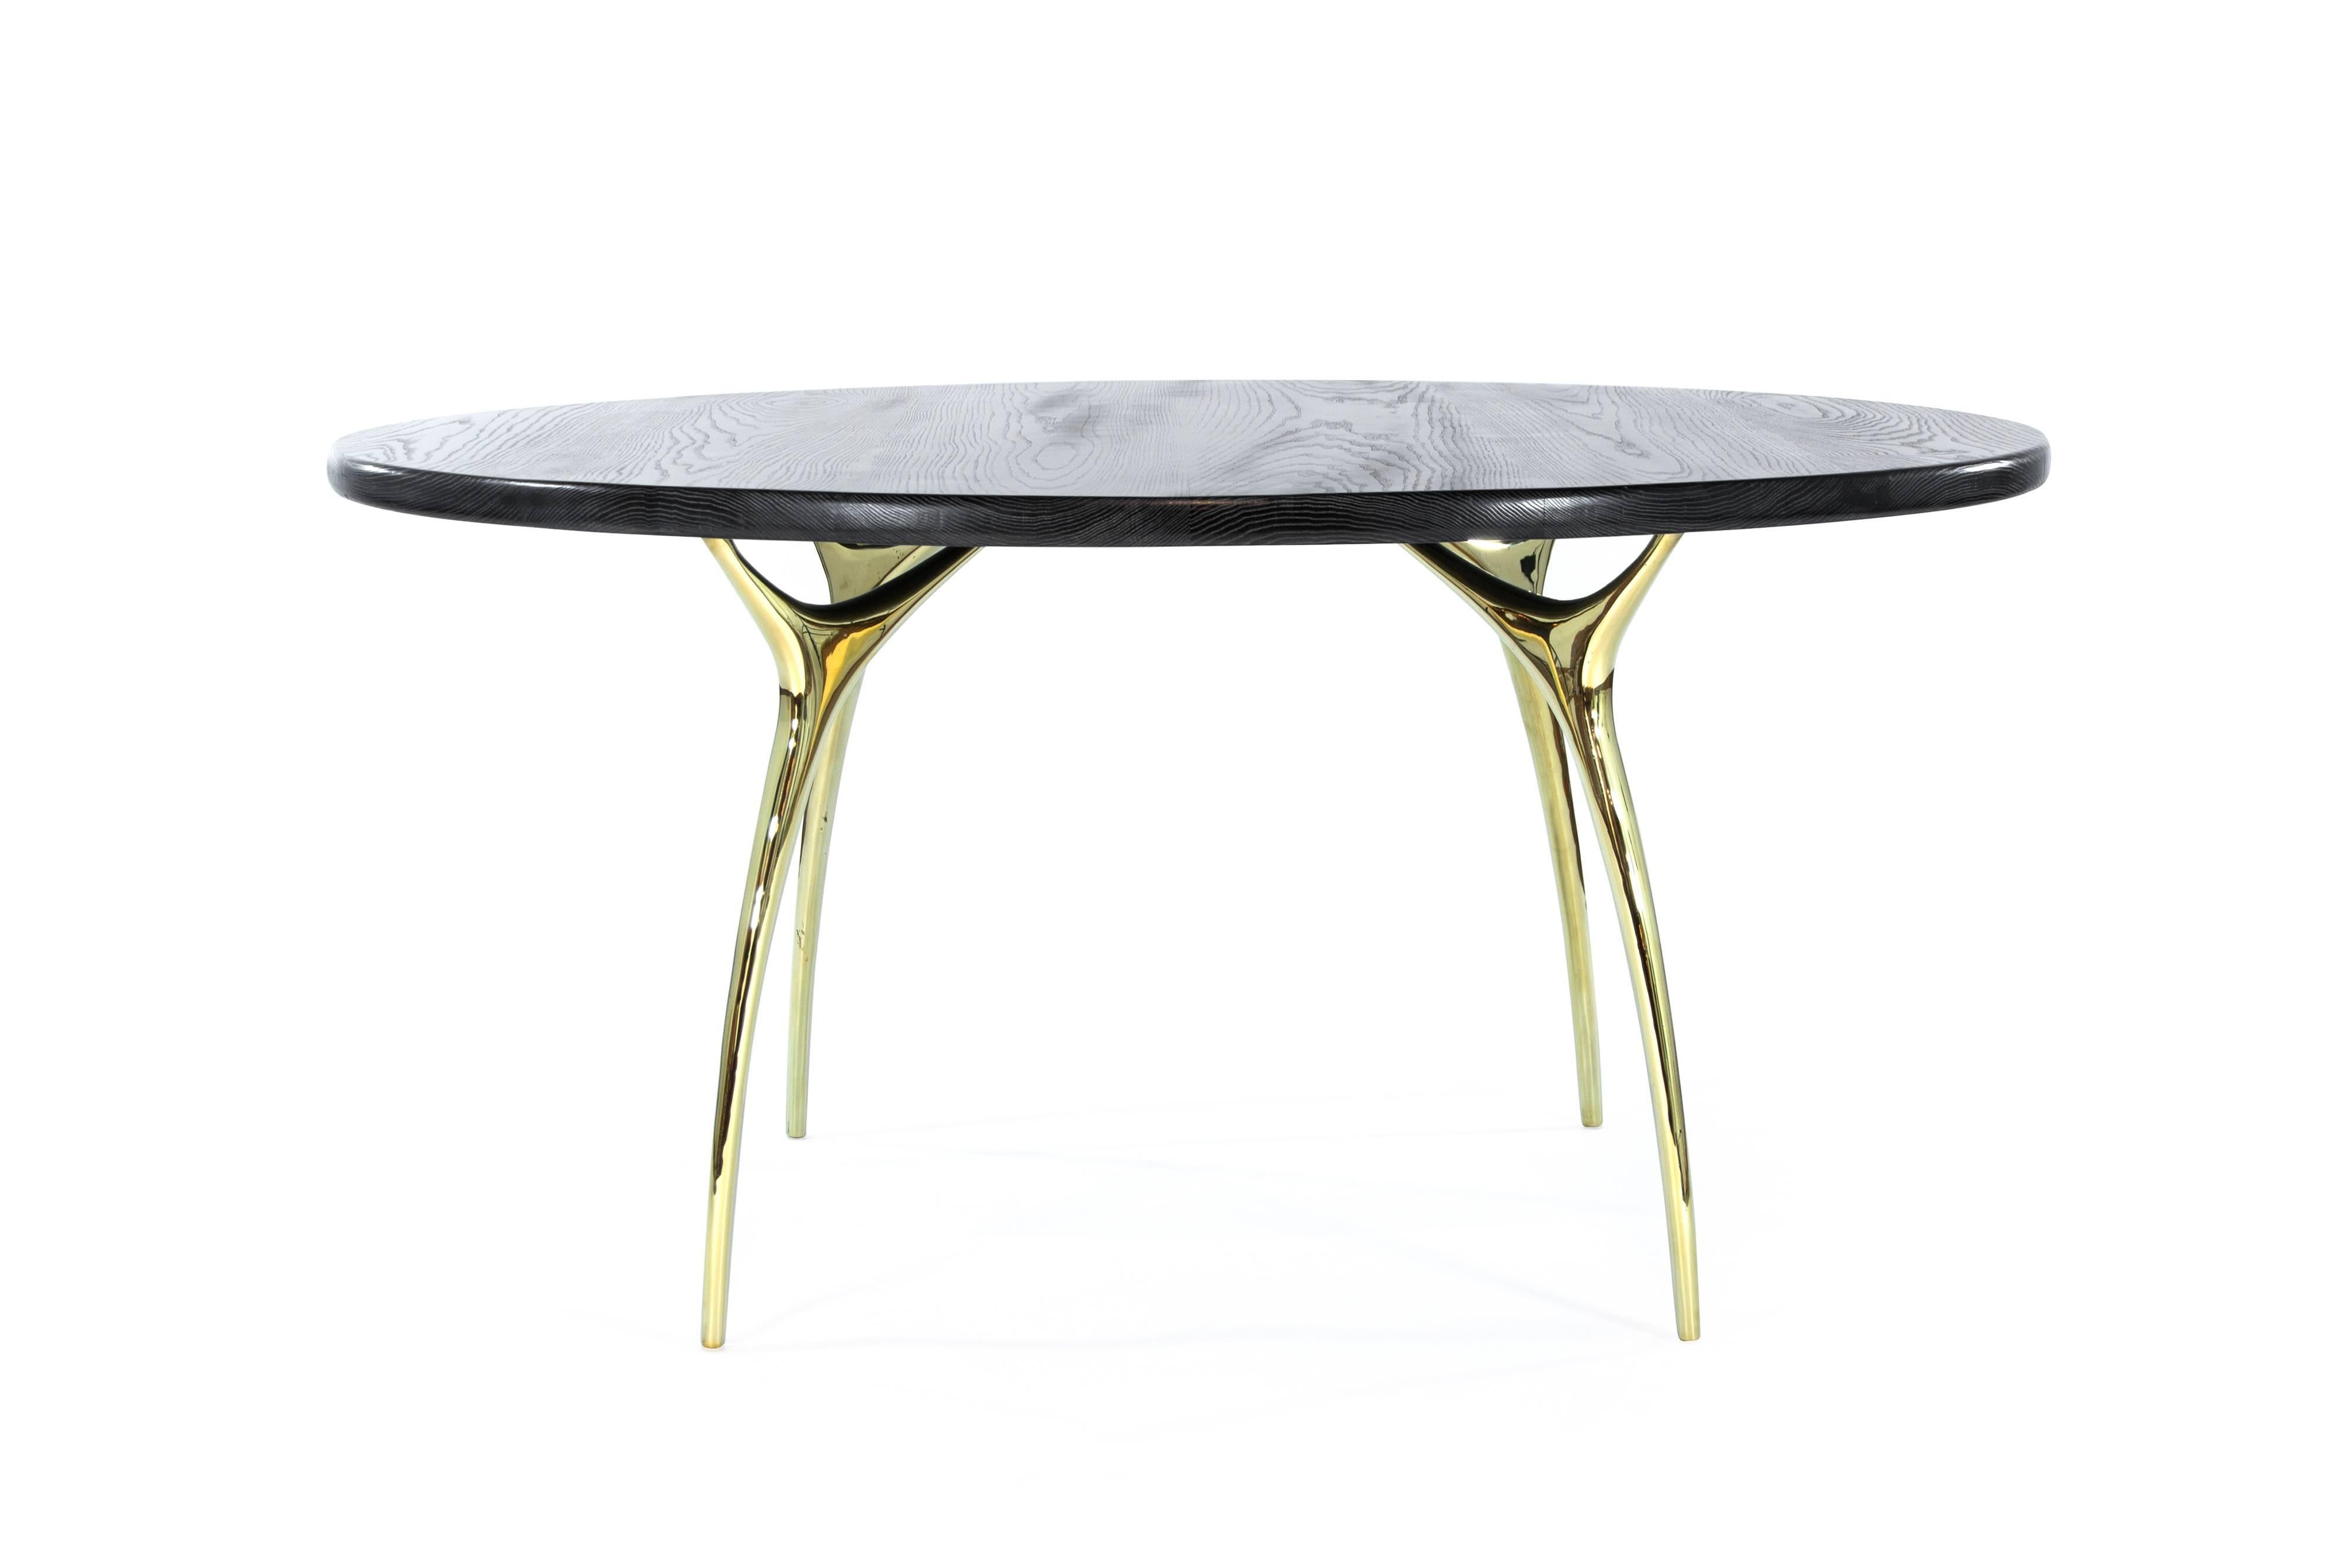 The Crescent Dining Table captures Gio Ponti’s Italian design aesthetic with gleaming metal and fluid curves. Four polished brass legs feel surprisingly organic, like delicate stalks that split and expand into slim branches. This delicate base is